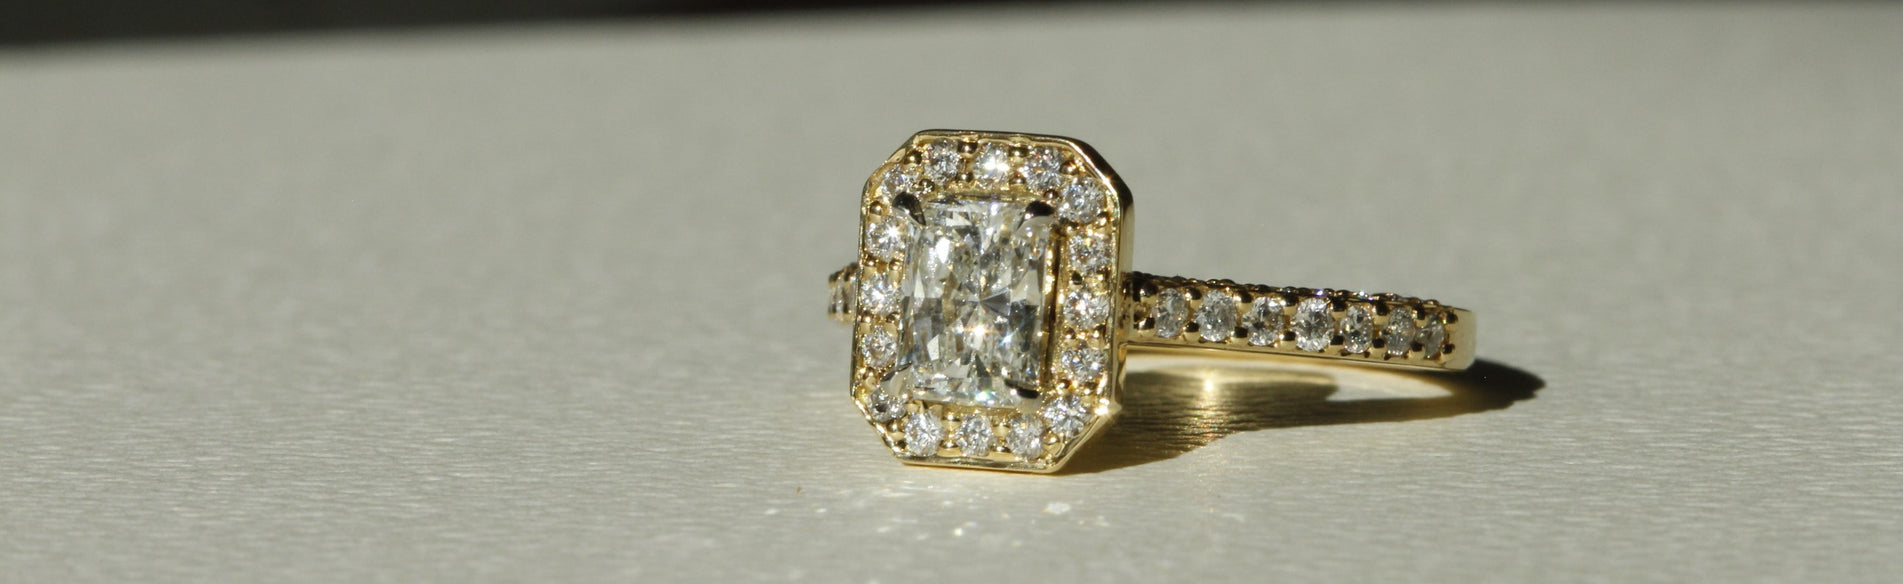 Bespoke_Enagagement_Ring_made_with_18k_Yellow_Gold_and_Diamonds_Banner_Imag